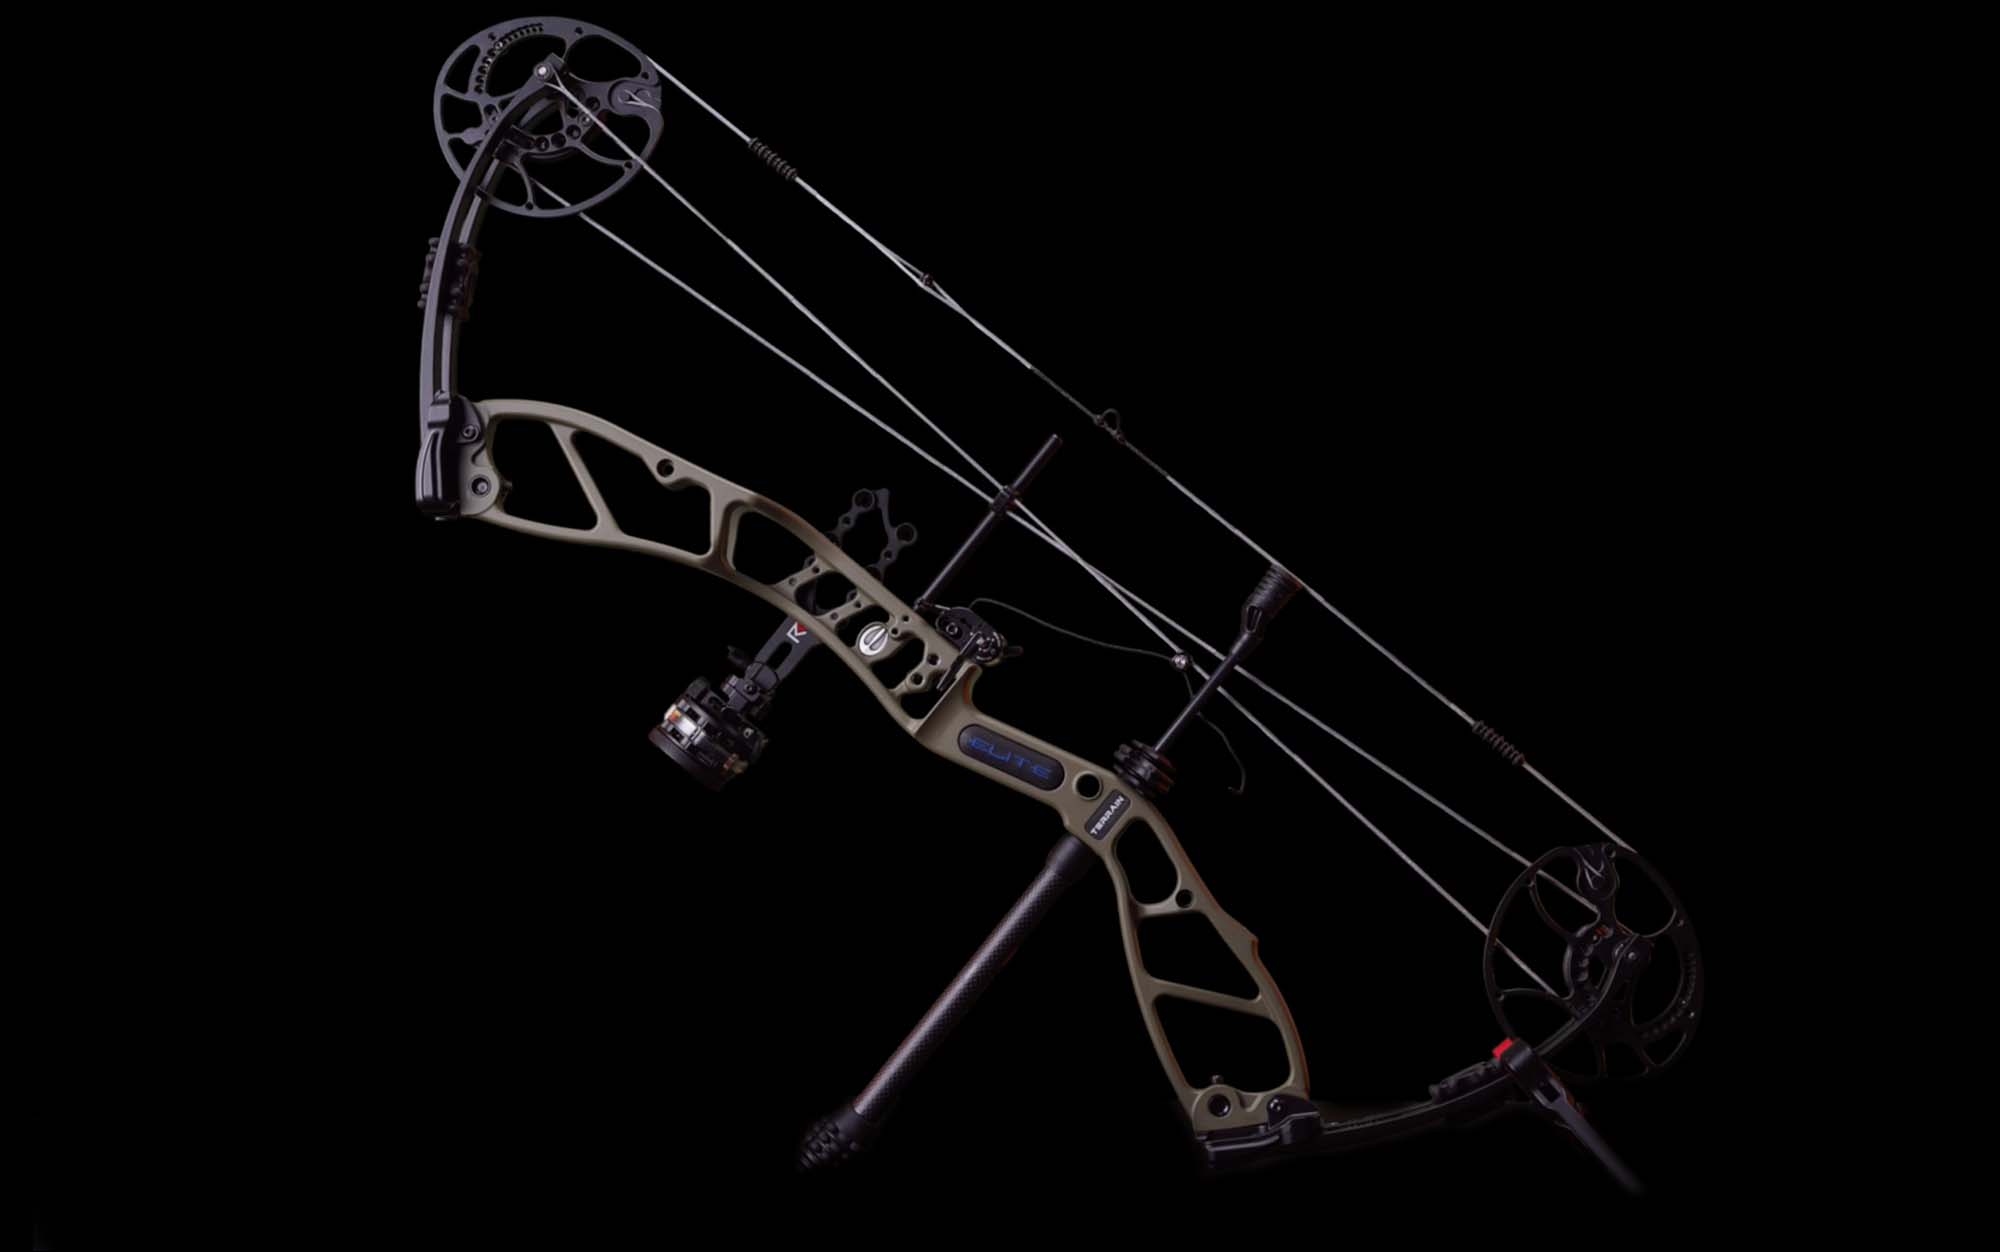 One of the best compound bows for the money, the elite terrain